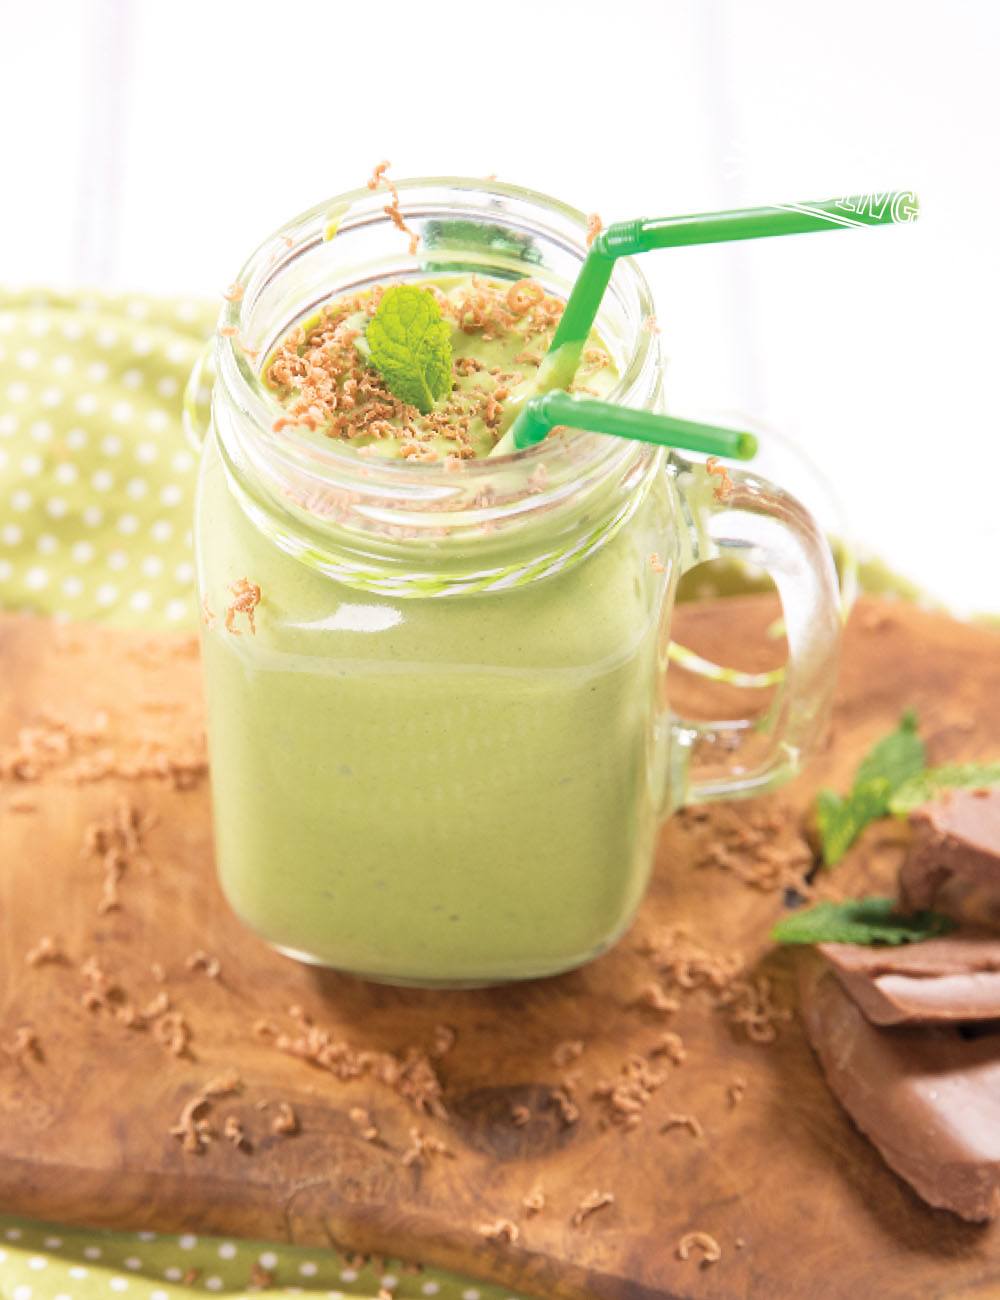 Healthy Shamrock Shake Recipe for kids | Healthy treats for kids. Main recipe image. This Shamrock shake is creamy, delicious and tastes like ice cream yet it contains only goodness and is super healthy for your little ones.